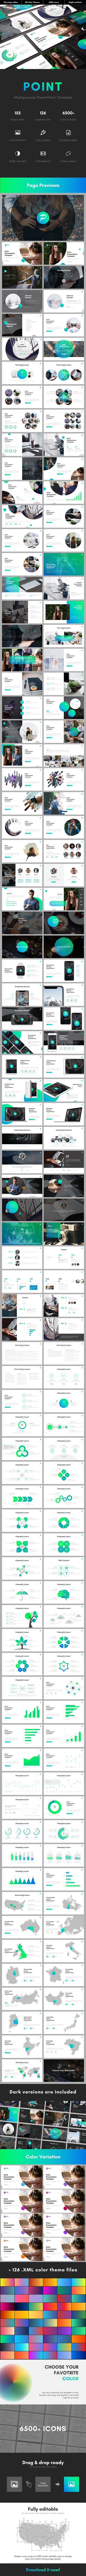 GraphicRiver Point Multipurpose PowerPoint Template 21122452